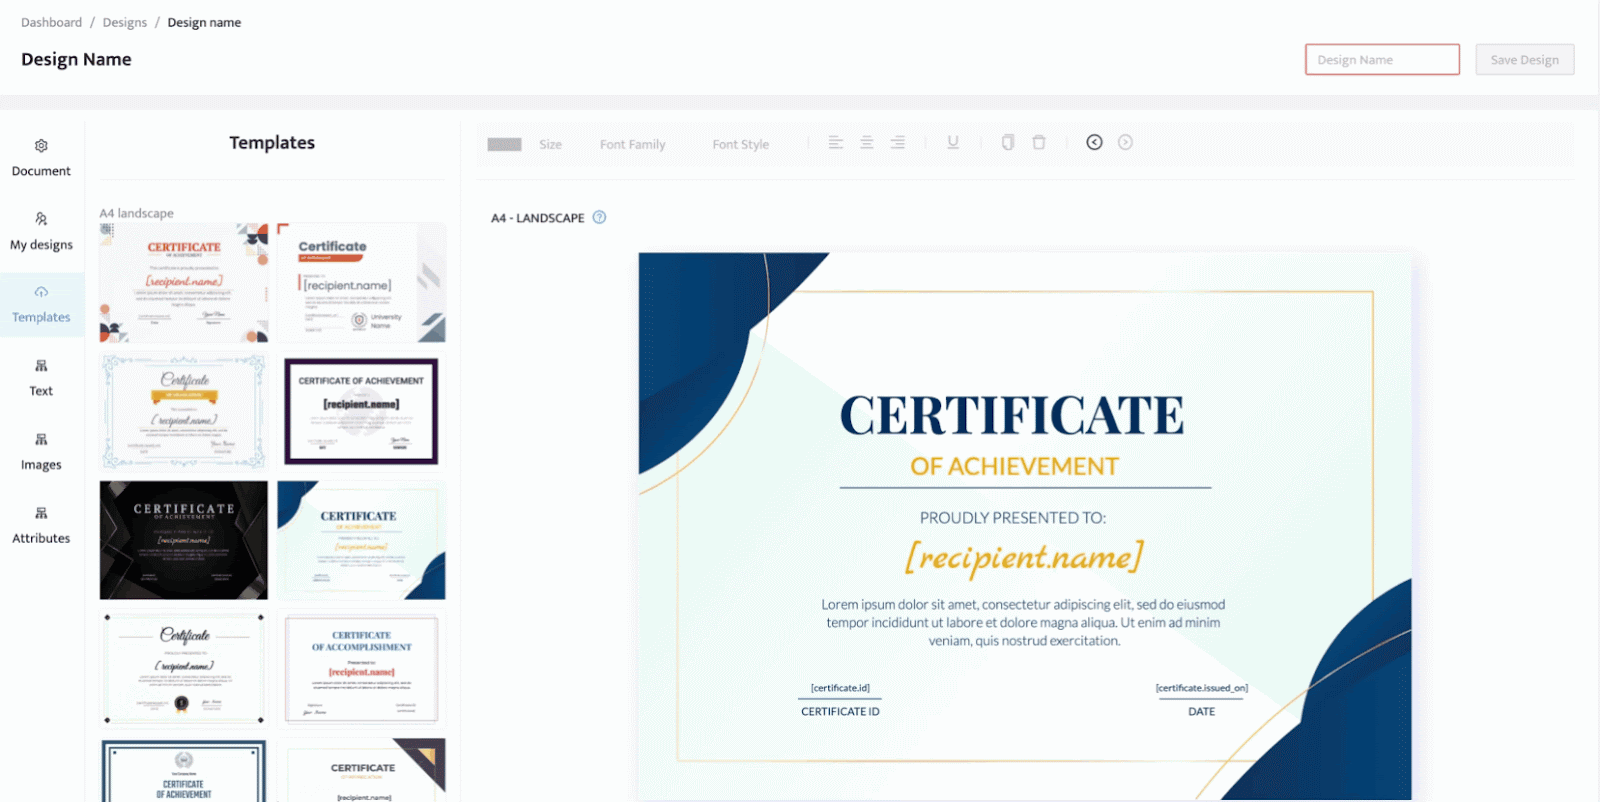 Certifier - Editing the text